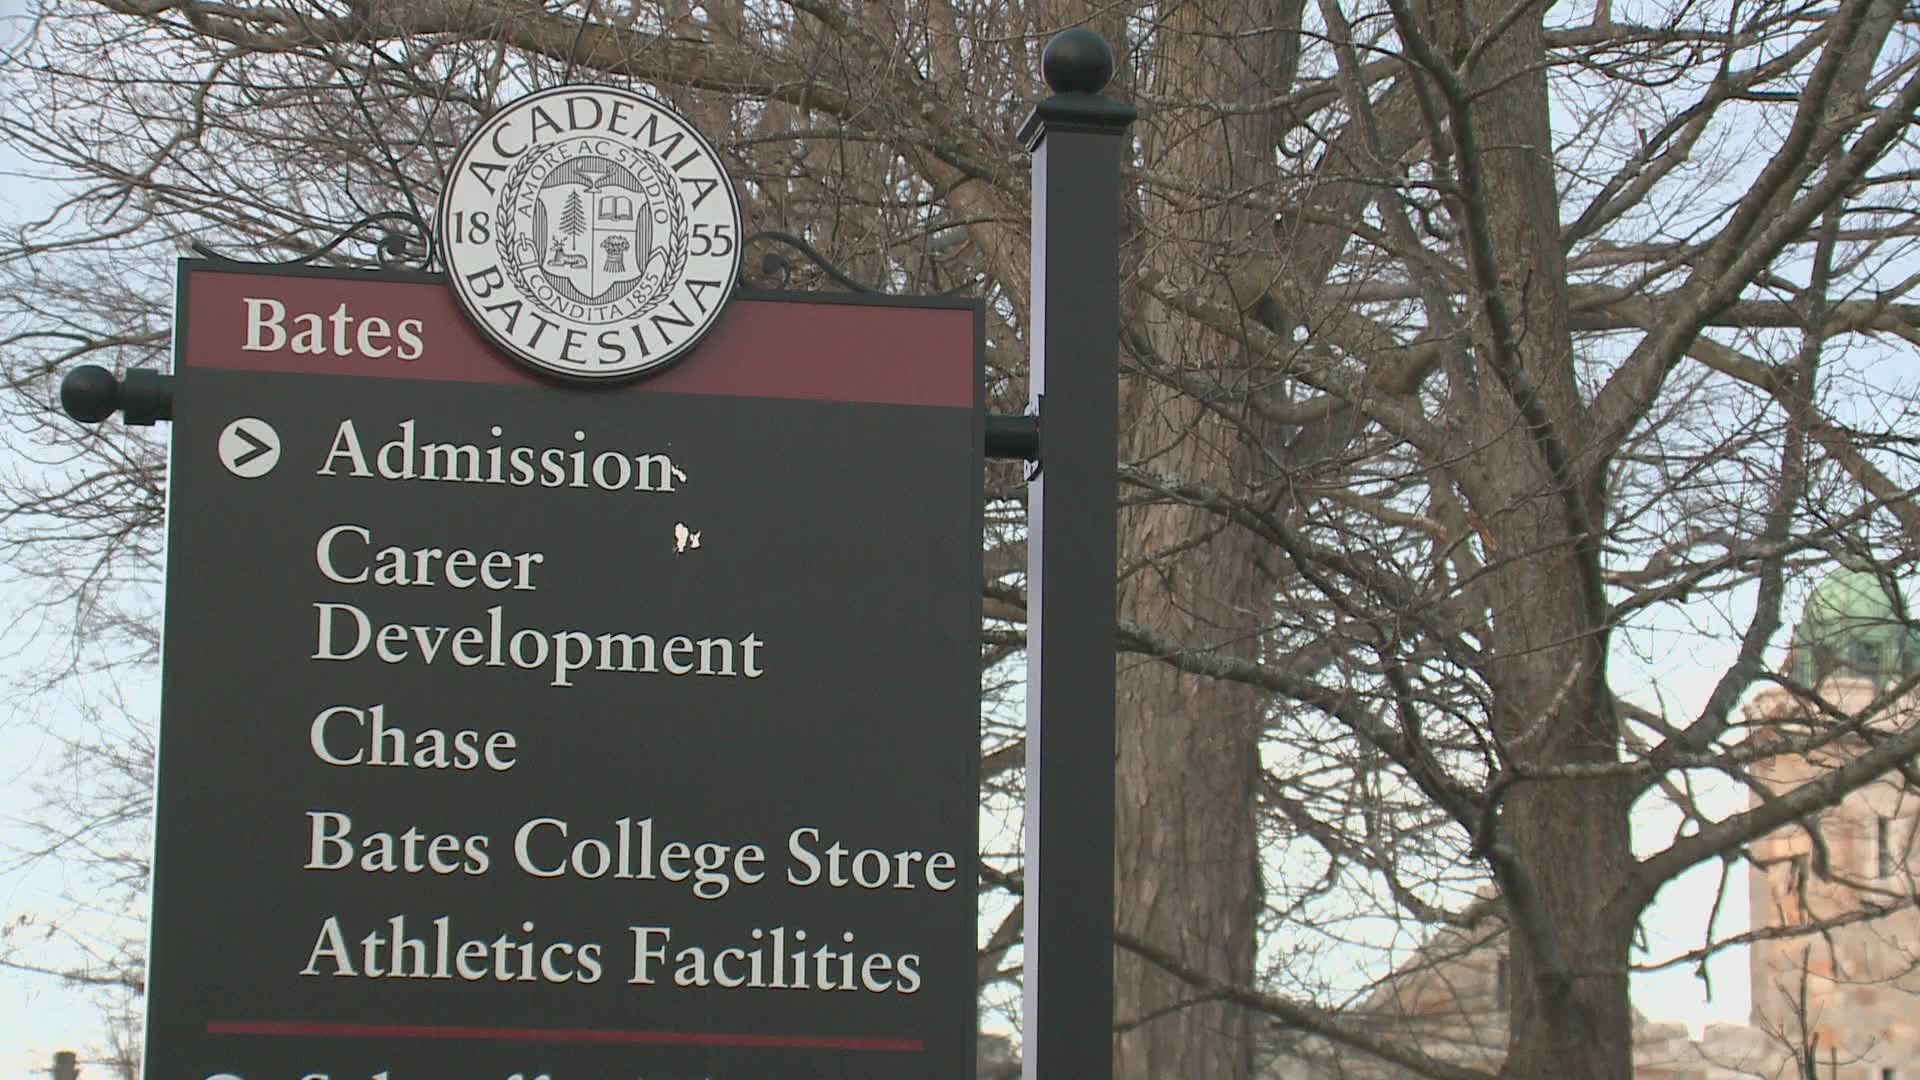 Bates College officials confirmed they have placed the officer on leave pending an investigation after video surfaced of alleged incident.